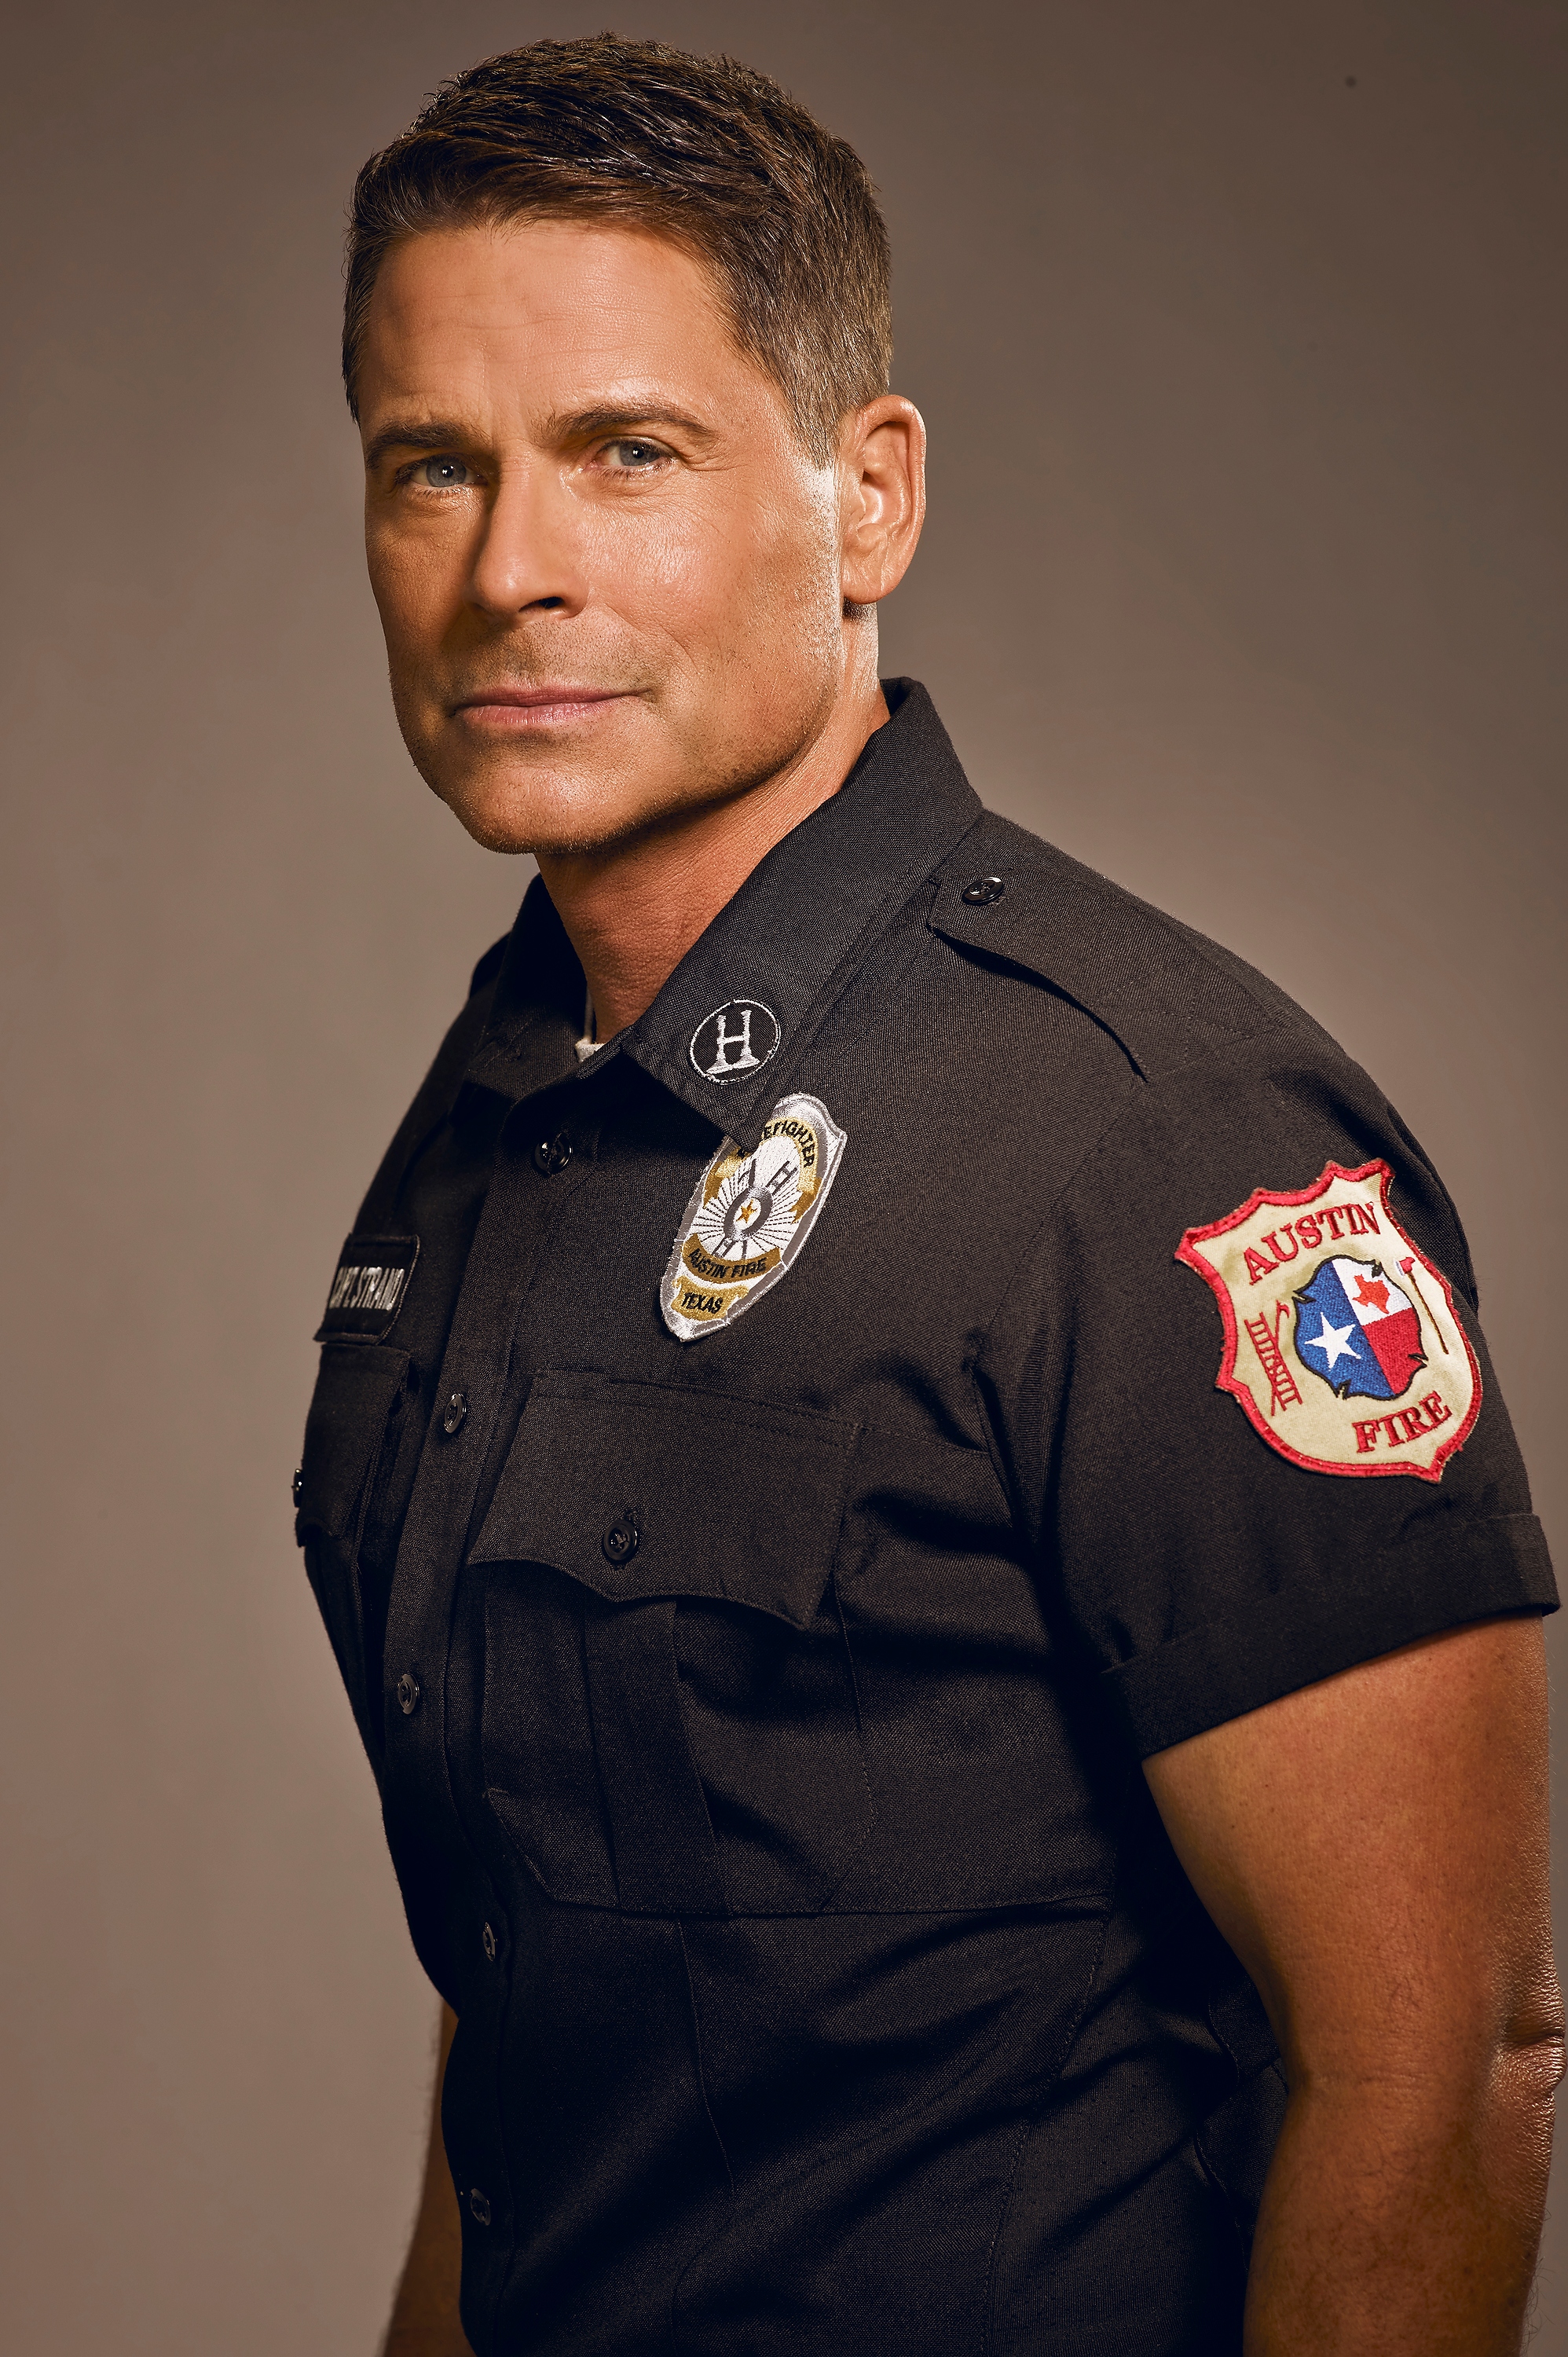 Rob Lowe as Owen Strand for the series premiere of "9-1-1: Lone Star" in January 2020 | Source: Getty Images